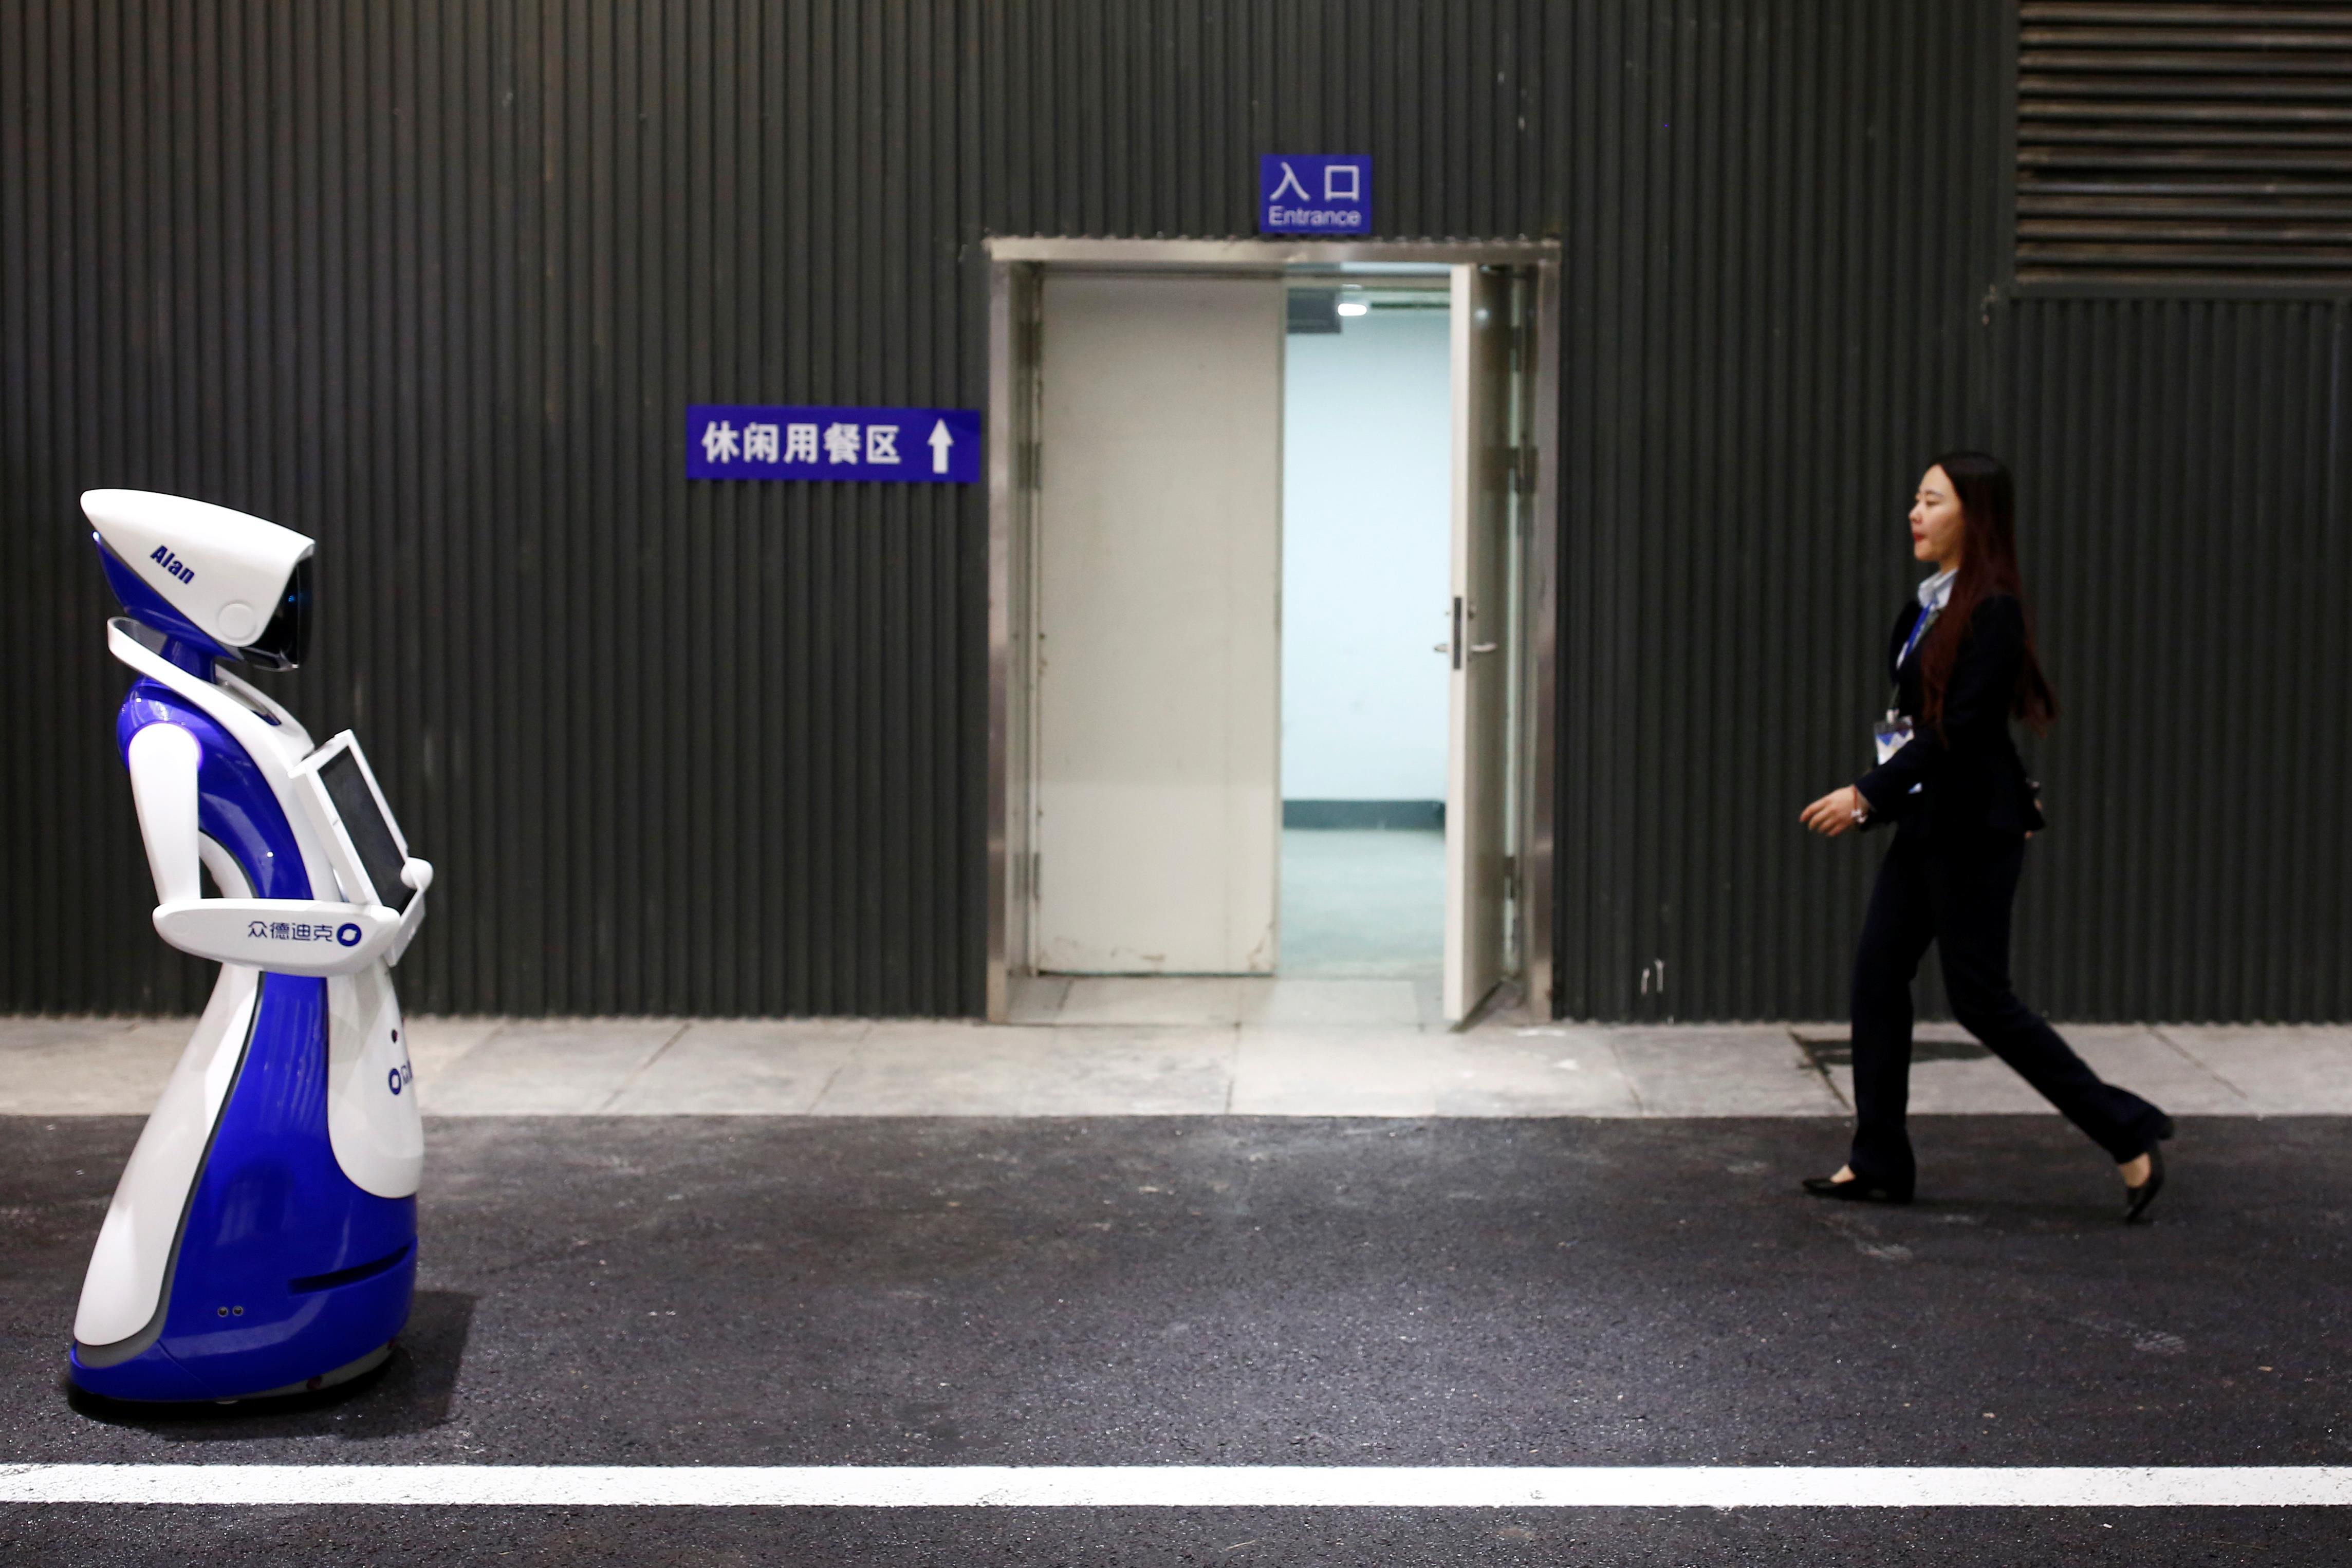 A woman walks past a robot by Robot4U Tech at the WRC 2016 World Robot Conference in Beijing.